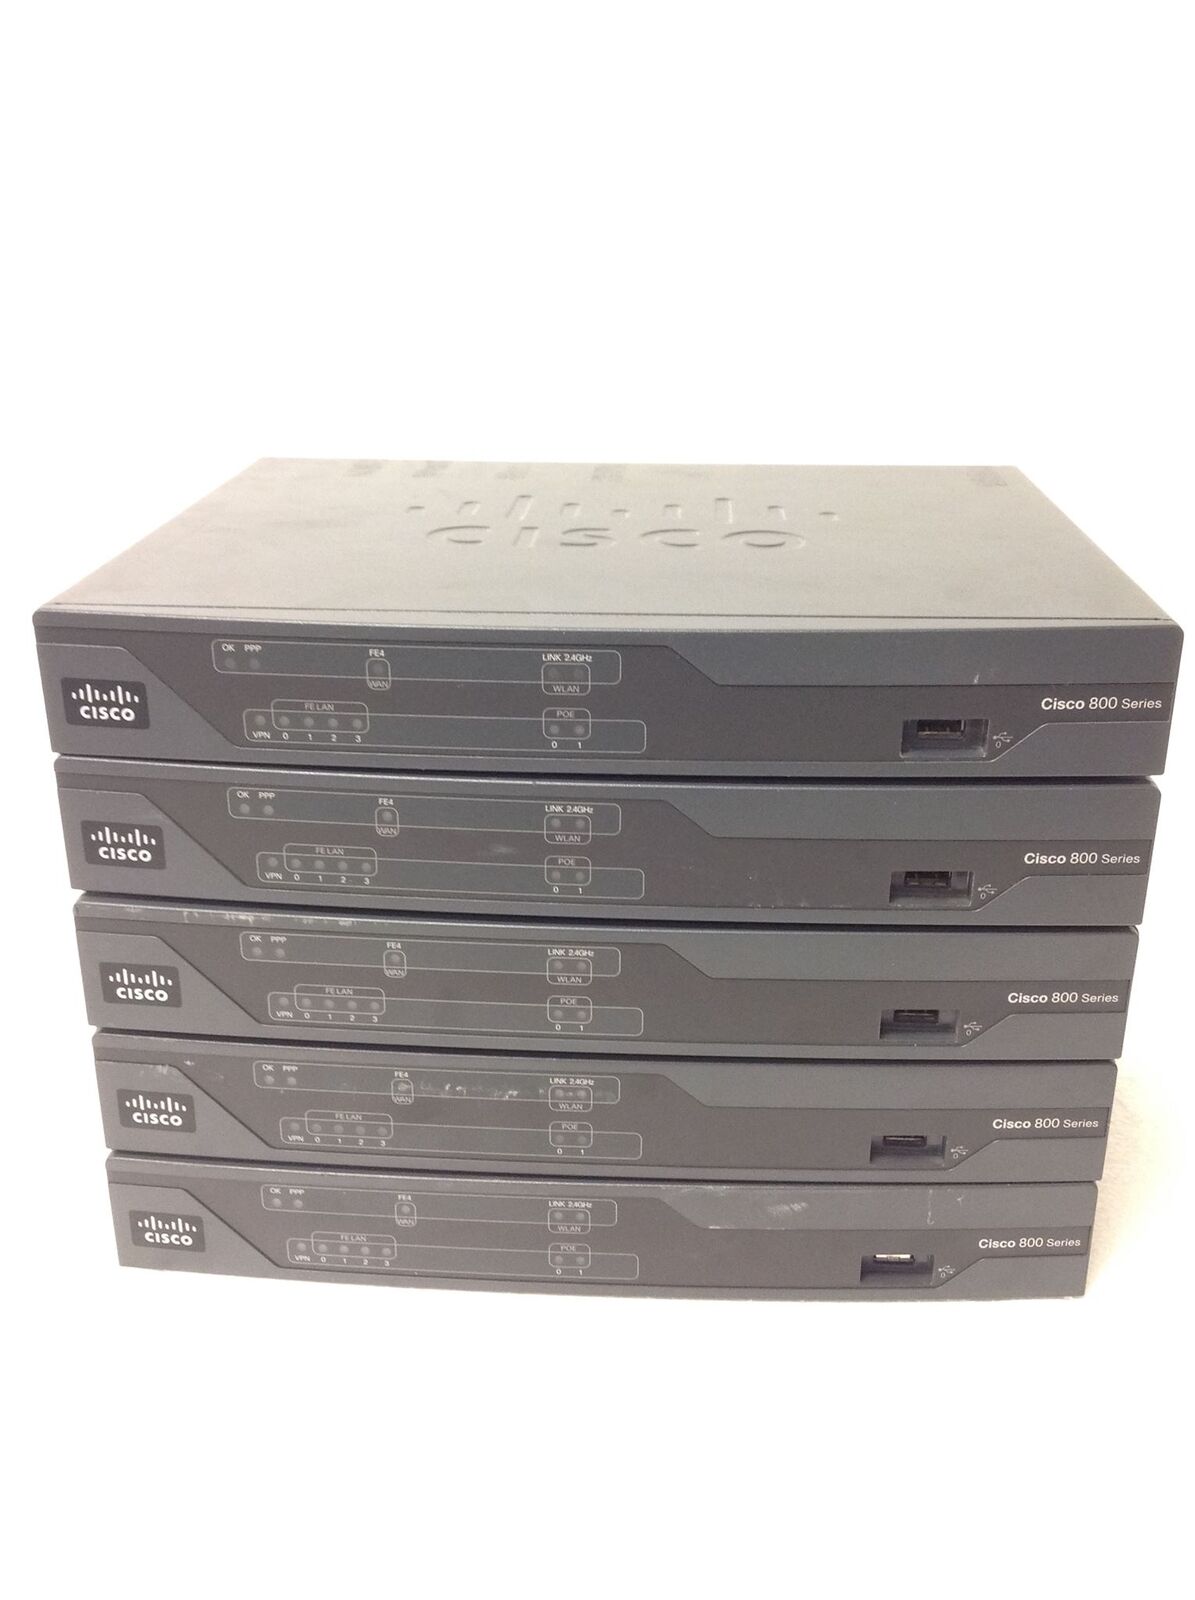 LOT OF 5 Cisco 881W-GN-A-K9 Ethernet Security Router - No AC Adapter WORKING